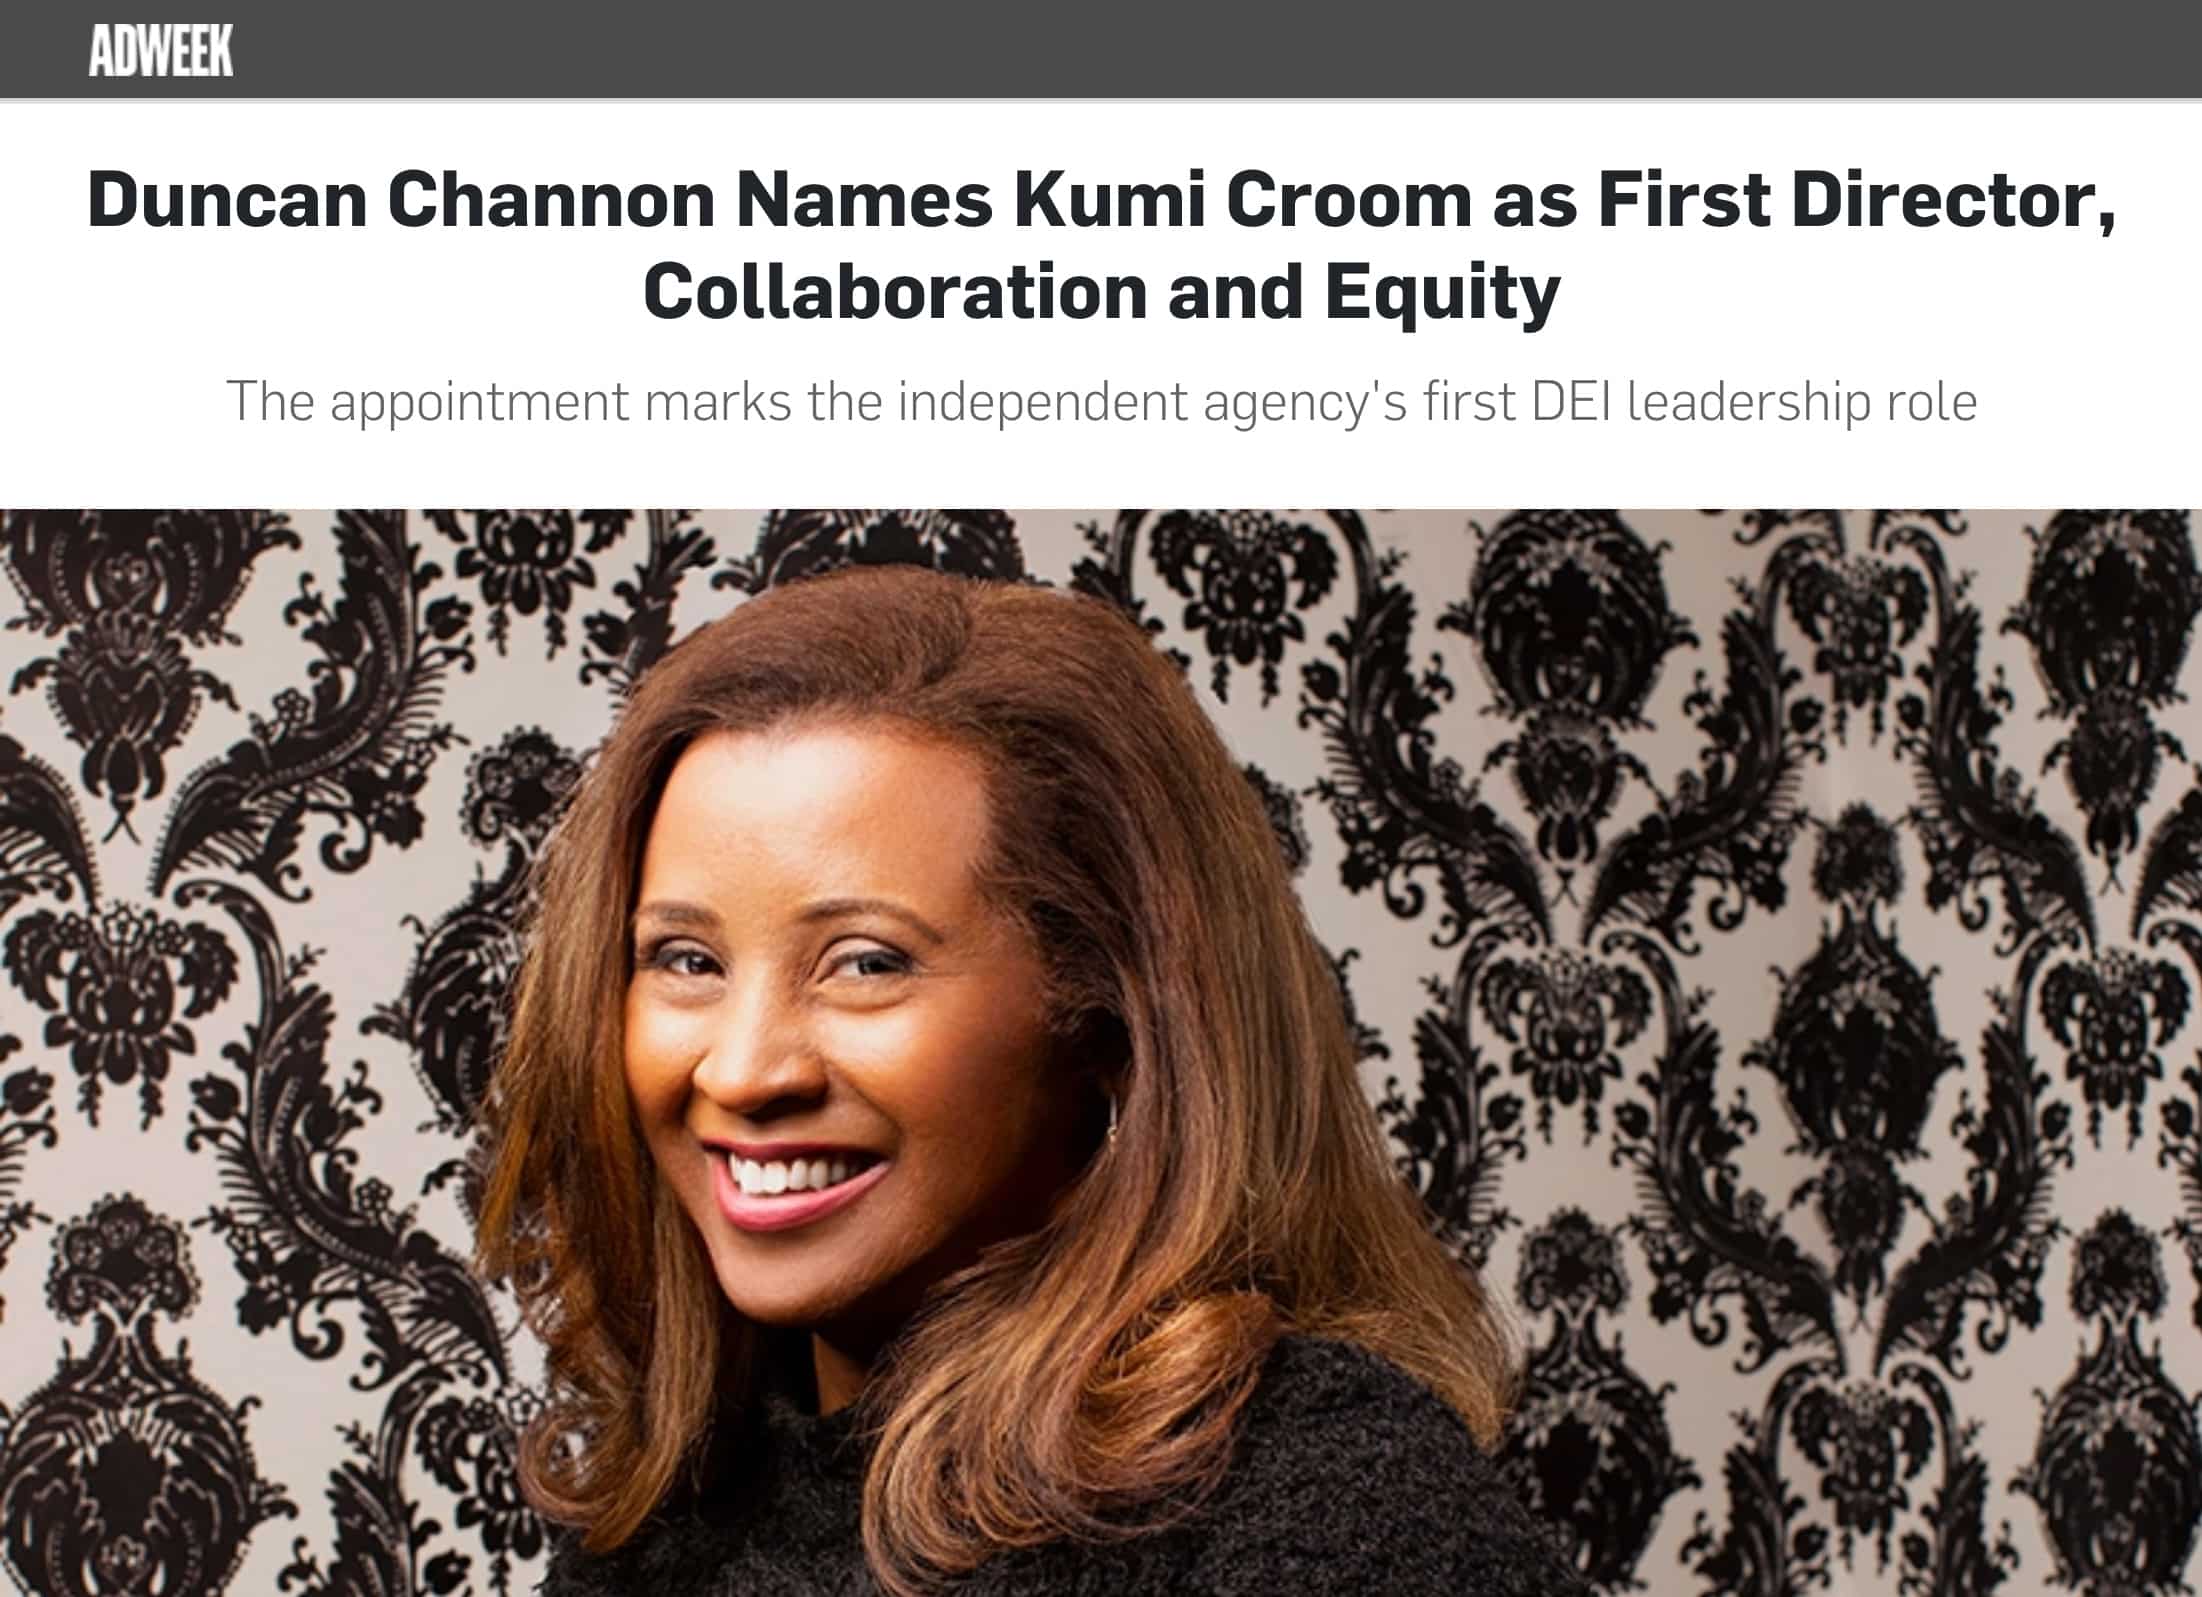 Portrait of DC employee Kumi Croom. She is smiling warmly and wearing a dark sweater, posting against black and white Jacquard pattern wallpaper. The ADWEEK logo appears in the top right corner and a headline below it reads: "Duncan Channon Names Kumi Croom as First Director, Collaboration and Equity. The appointment marks the independant agency's first DEI leadership role."